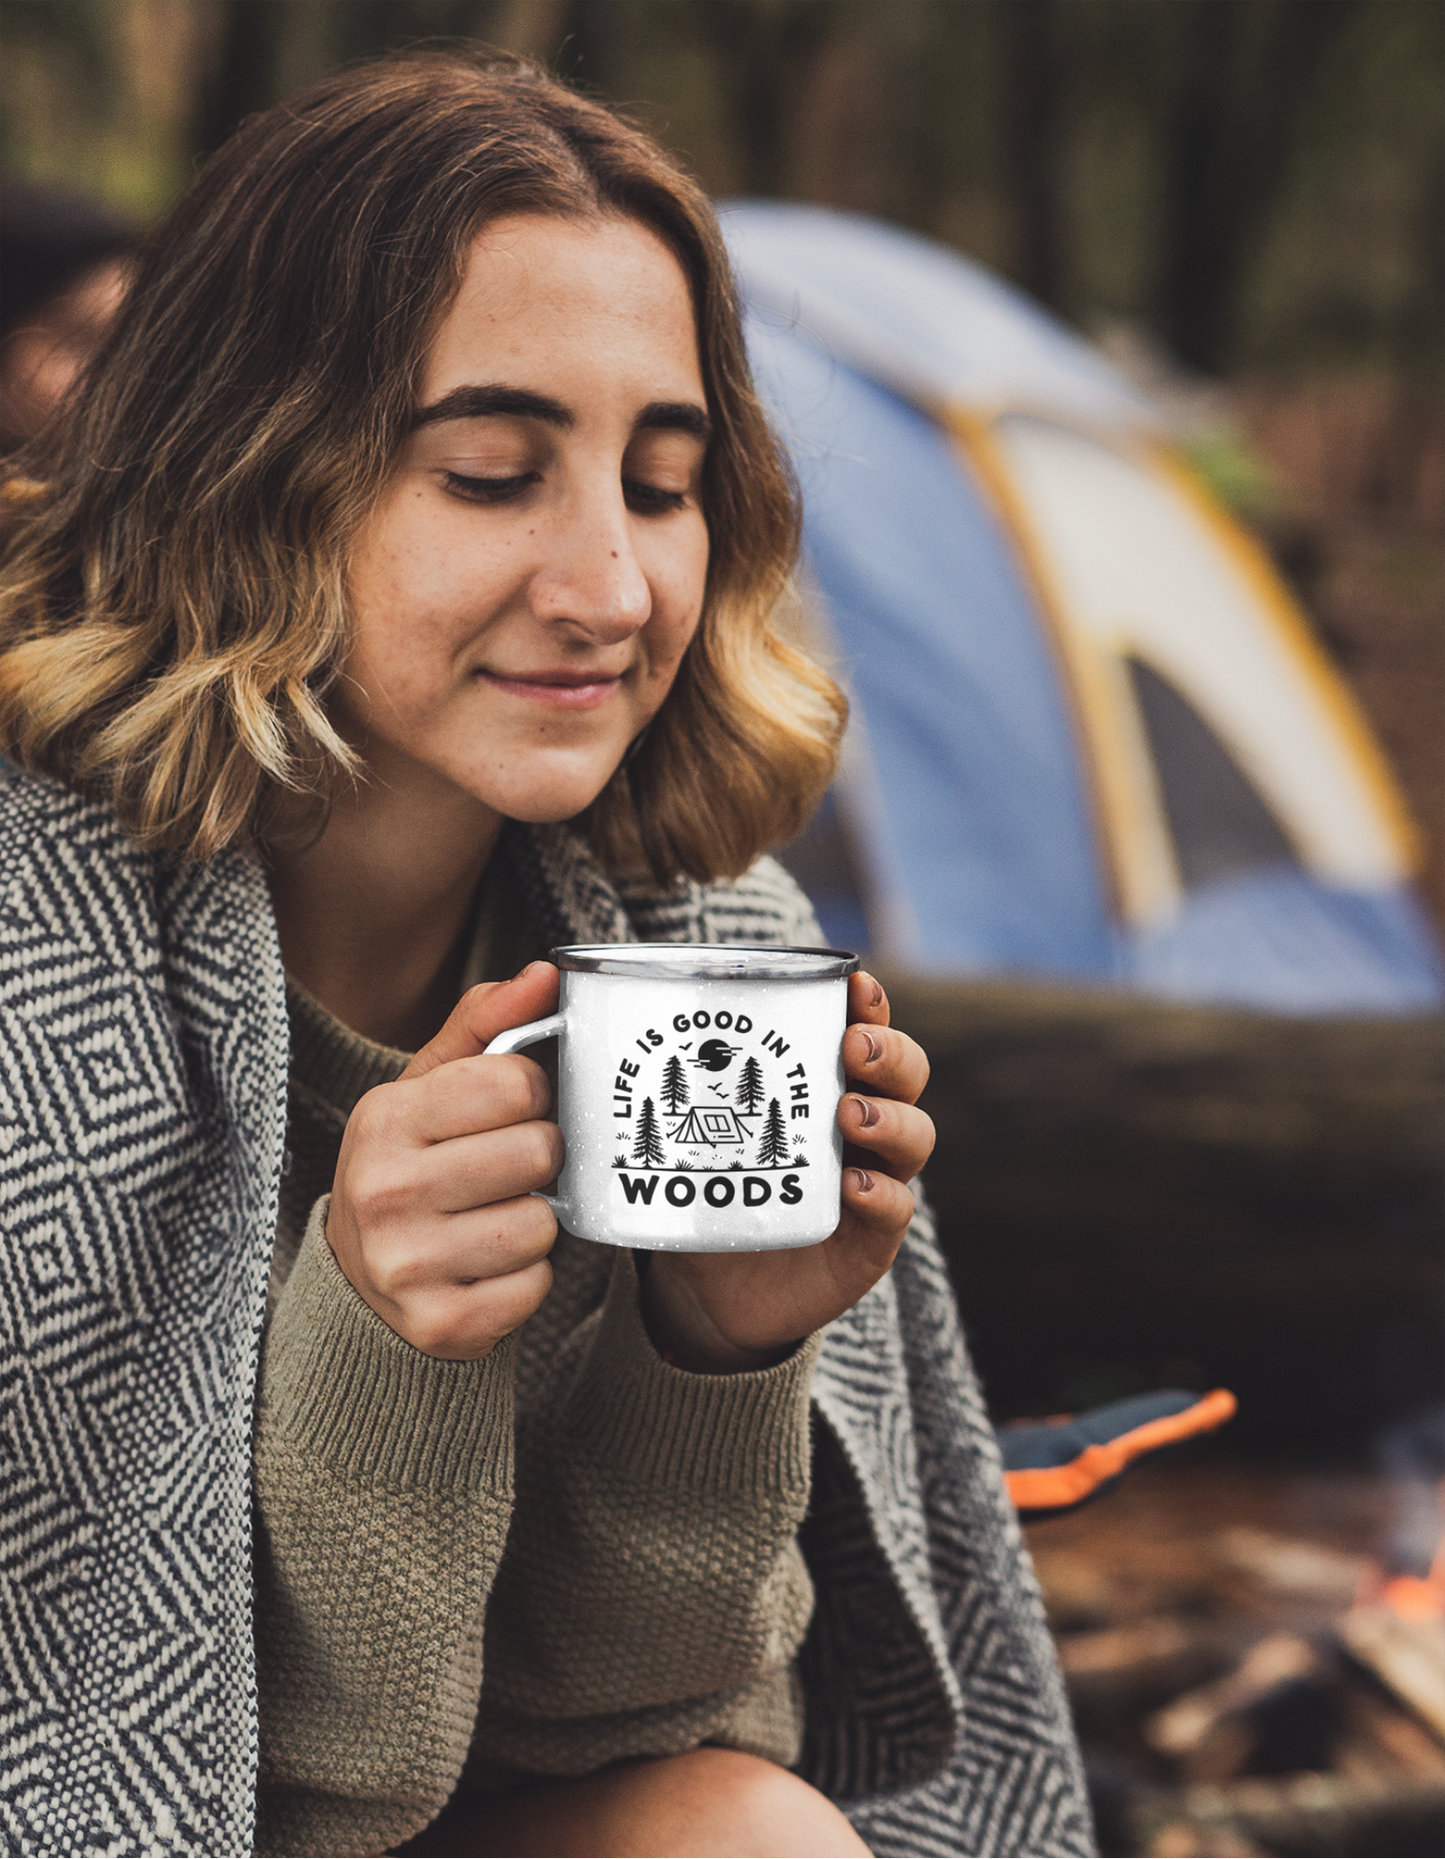 Life Is Good In The Woods Mug